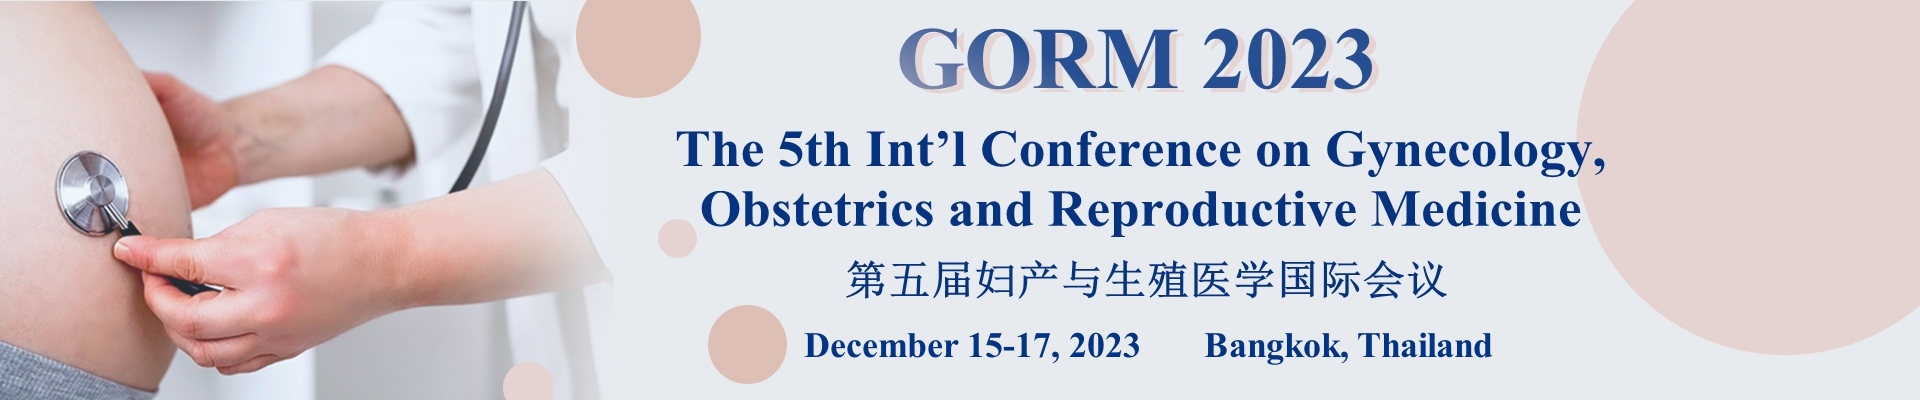 The 5th Int’l Conference on Gynecology, Obstetrics and Reproductive Medicine (GORM 2023)